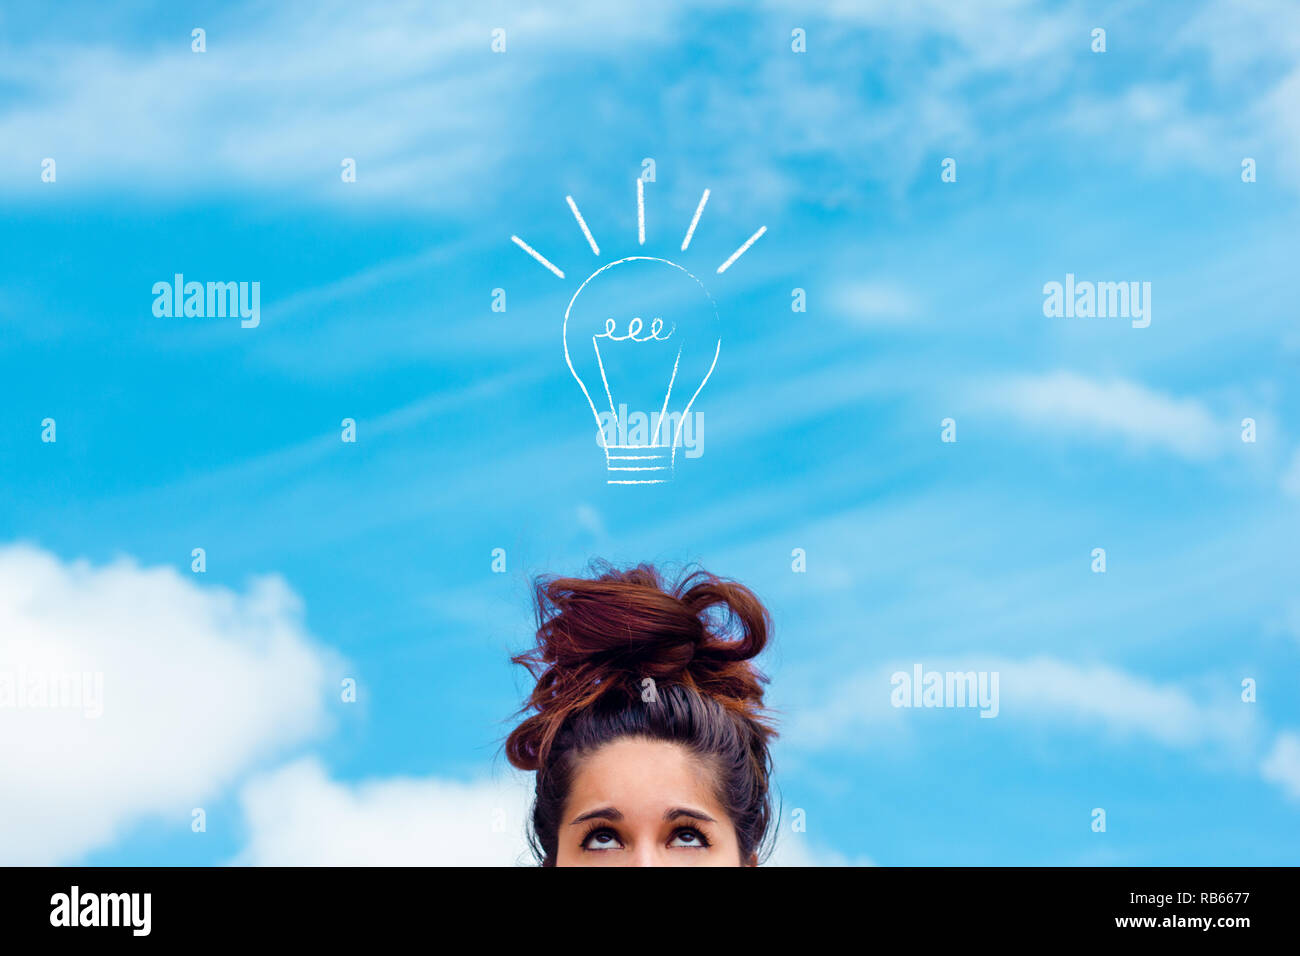 concept of innovation, idea, creativity. Brunette girl with messy bun looking up at a drawn light bulb on the blue sky Stock Photo